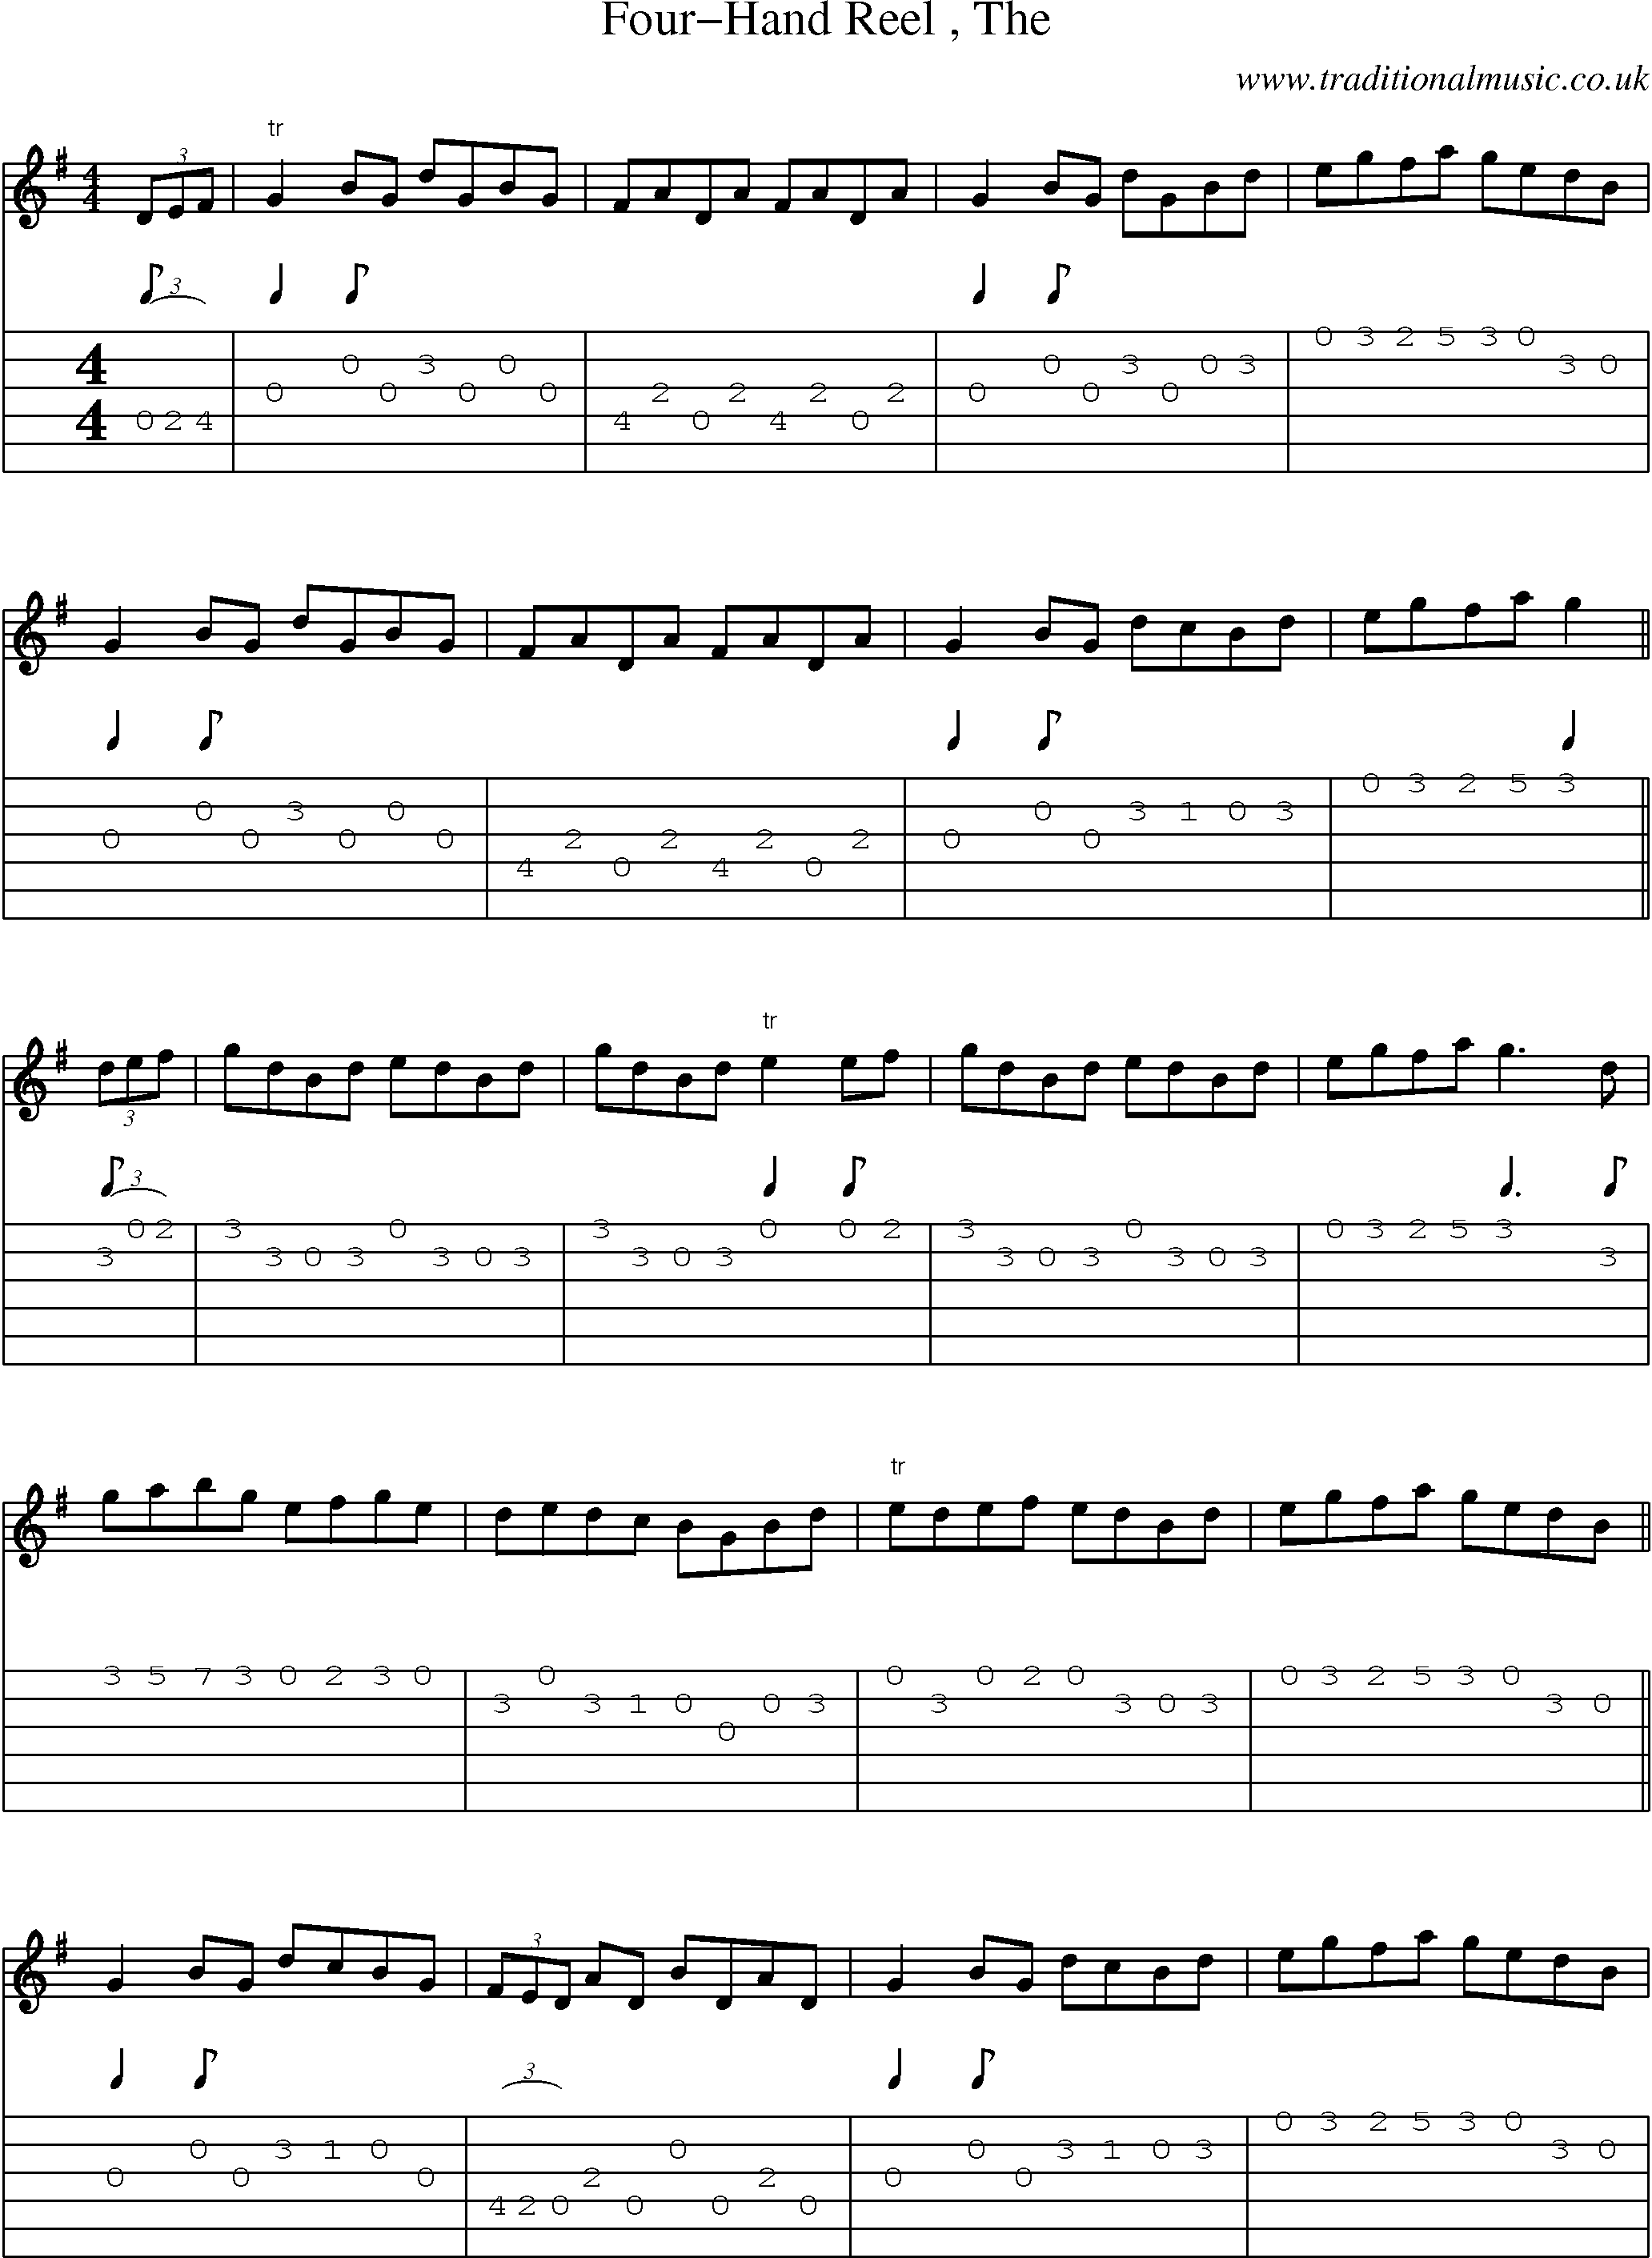 Music Score and Guitar Tabs for Fourhand Reel